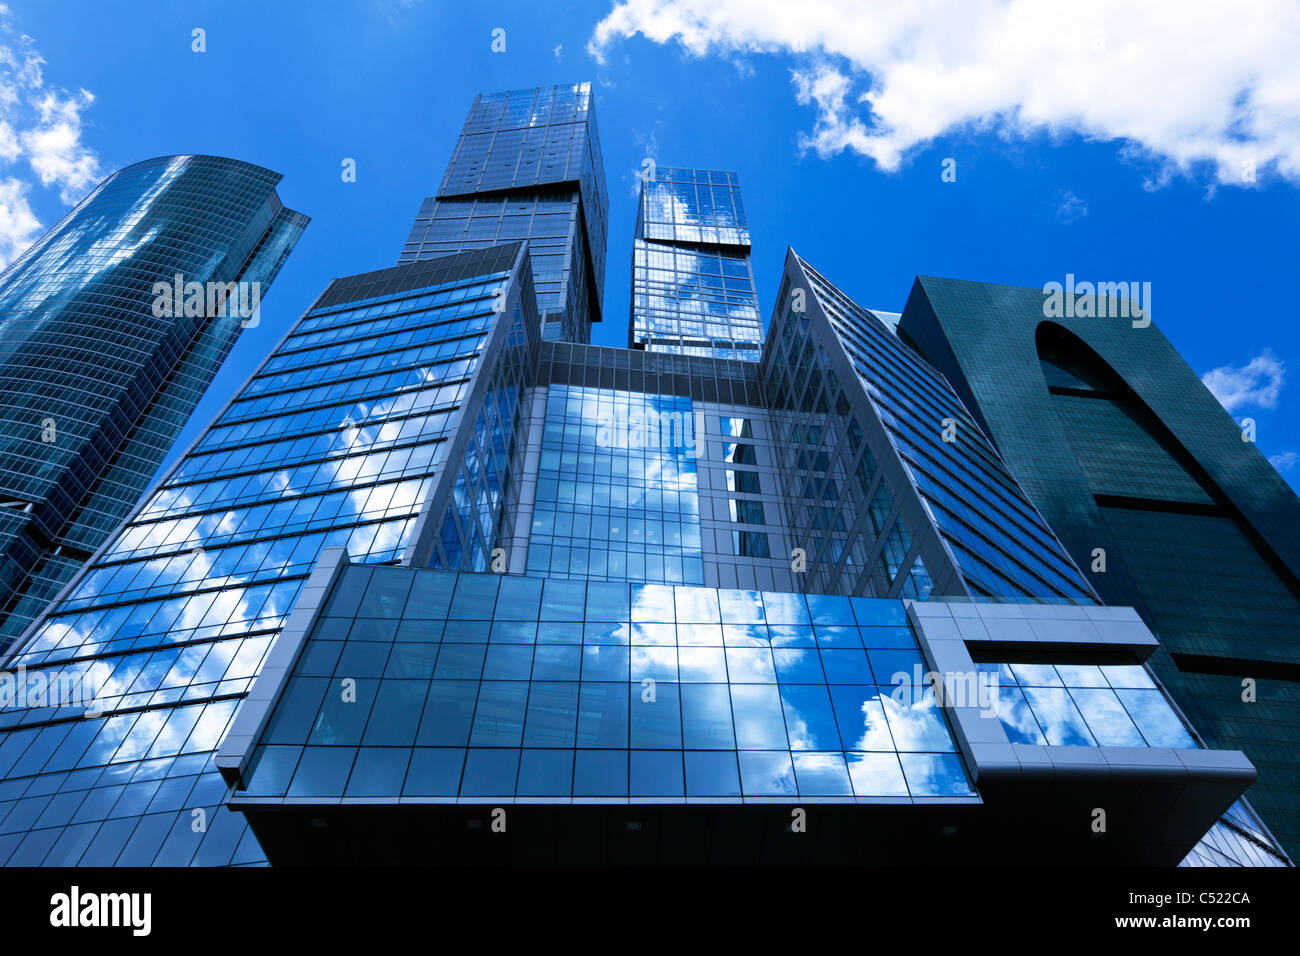 The glass facades of office buildings. Stock Photo